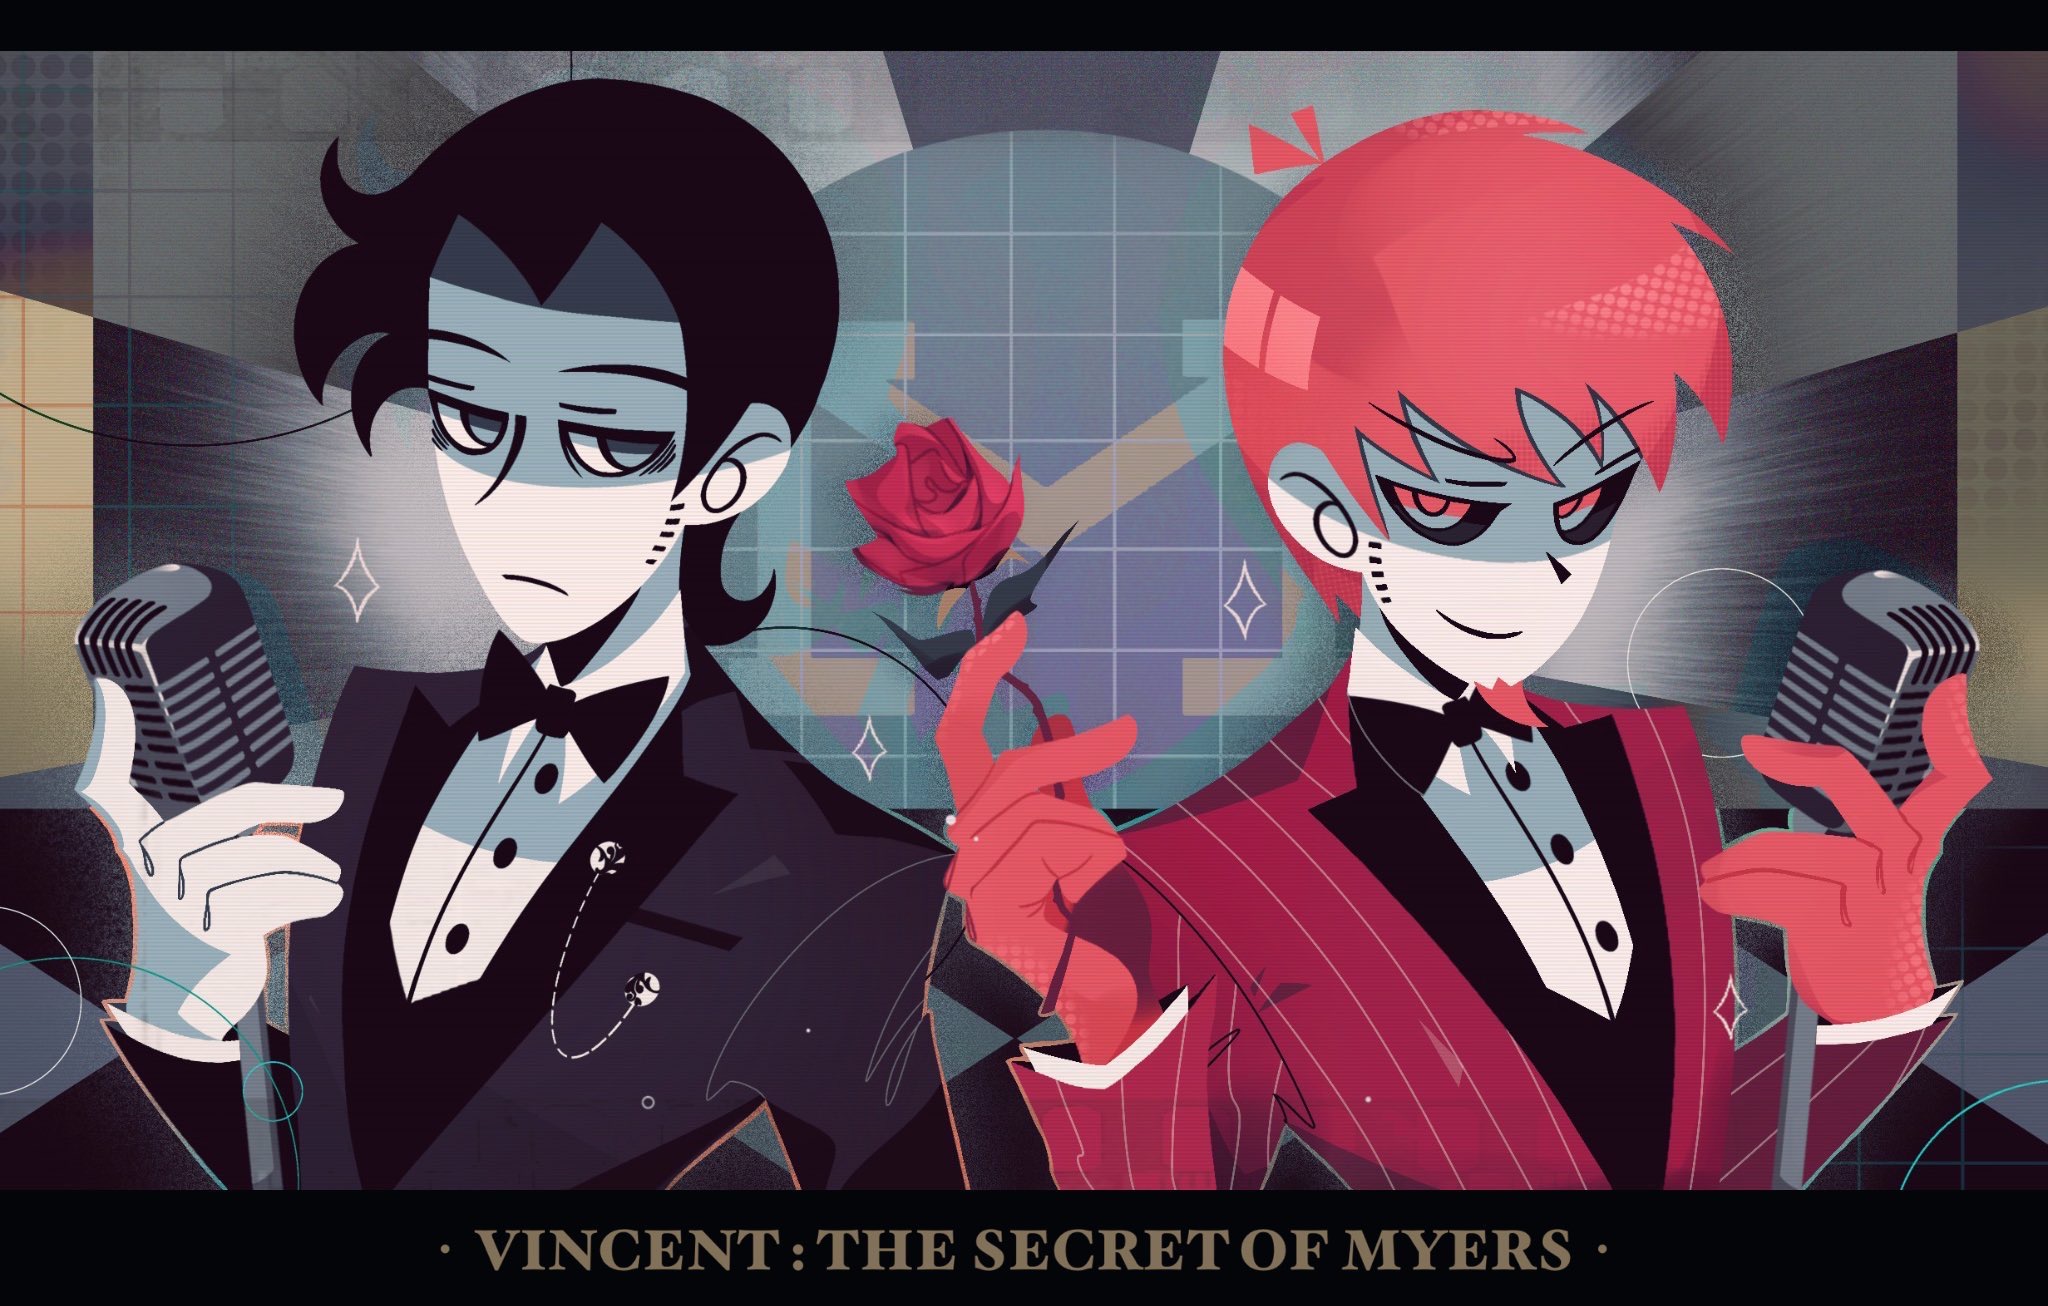 The Secret Wallpapers